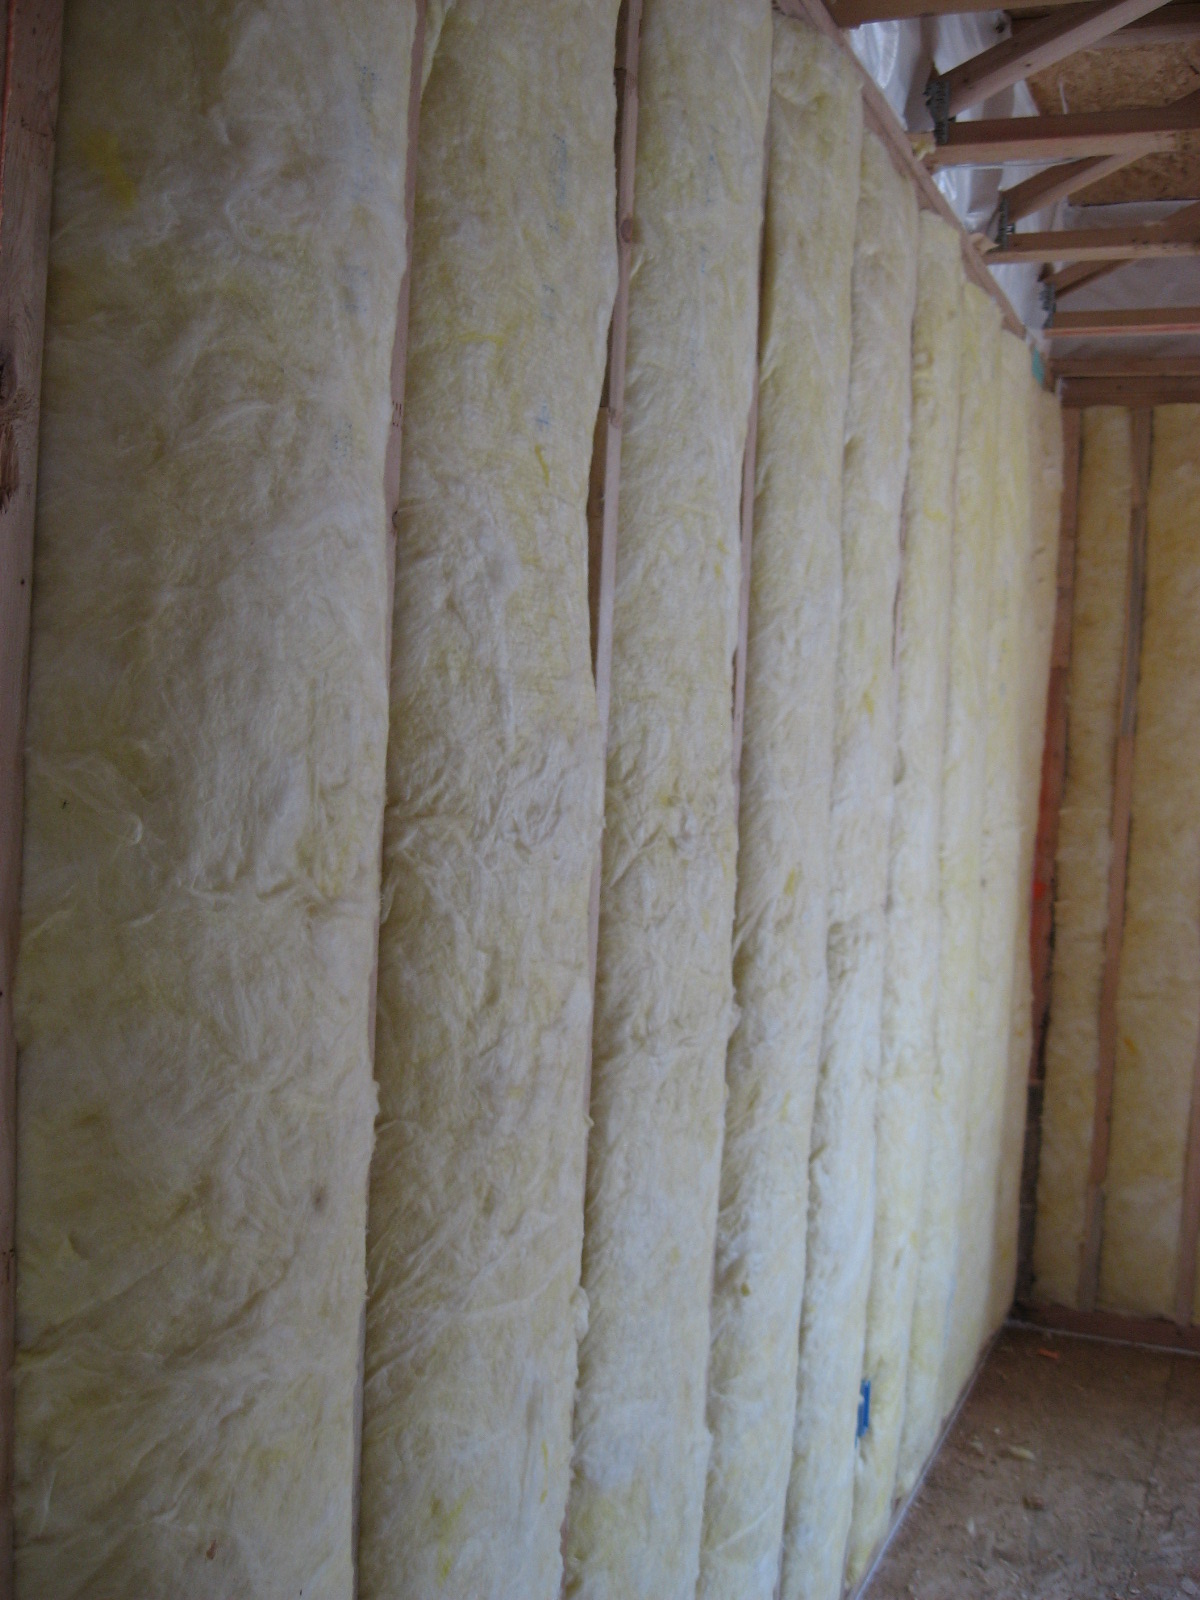 Unfaced fiberglass batt insulation is installed to completely fill the wall cavities 